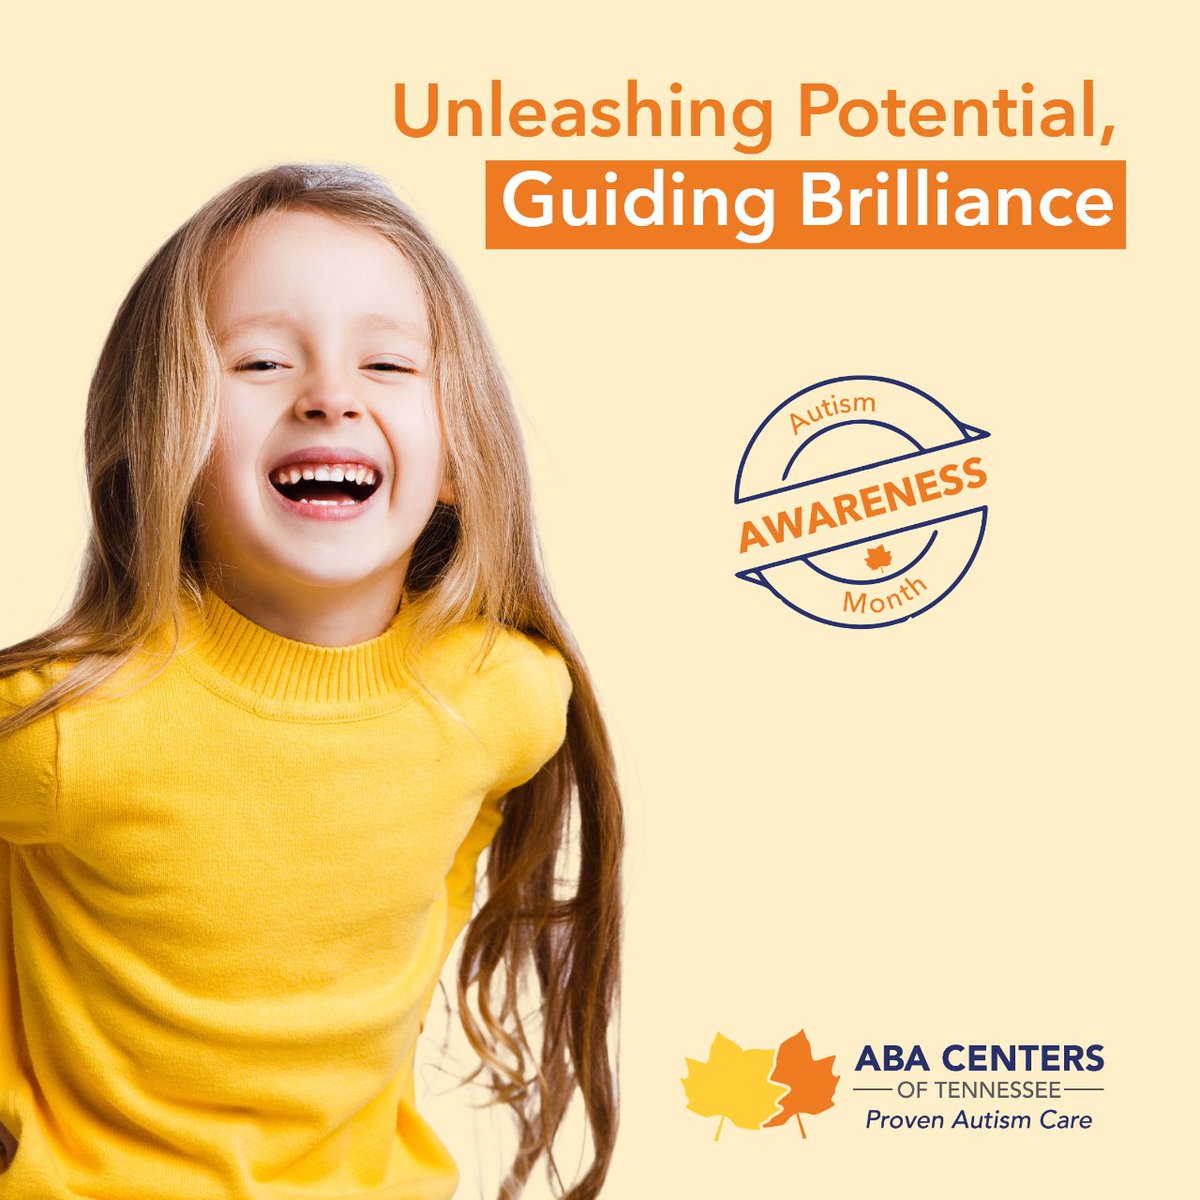 Unlock your child's potential at ABA Centers of Tennessee! Our supportive environment and cutting-edge resources provide the perfect backdrop for growth. Call (844) 948-2030 for a FREE consultation or click: bit.ly/abatnbc041024x

#ABACentersOfTennessee #ABATherapy  #AutismLove